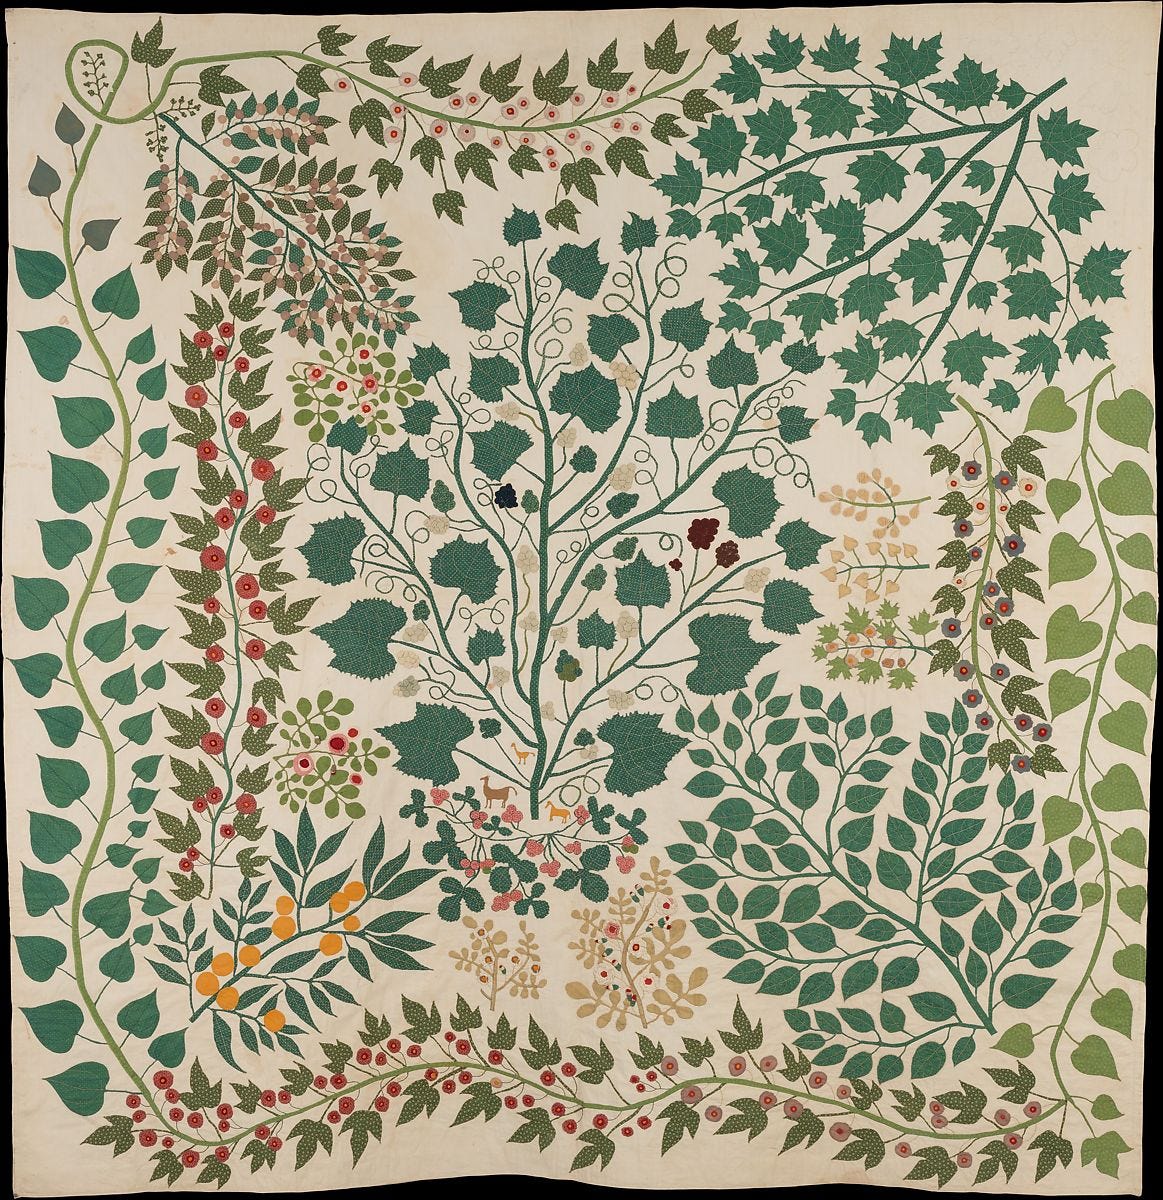 Tree of life quilt with green vines and leaves, and different colored berries and flowers.